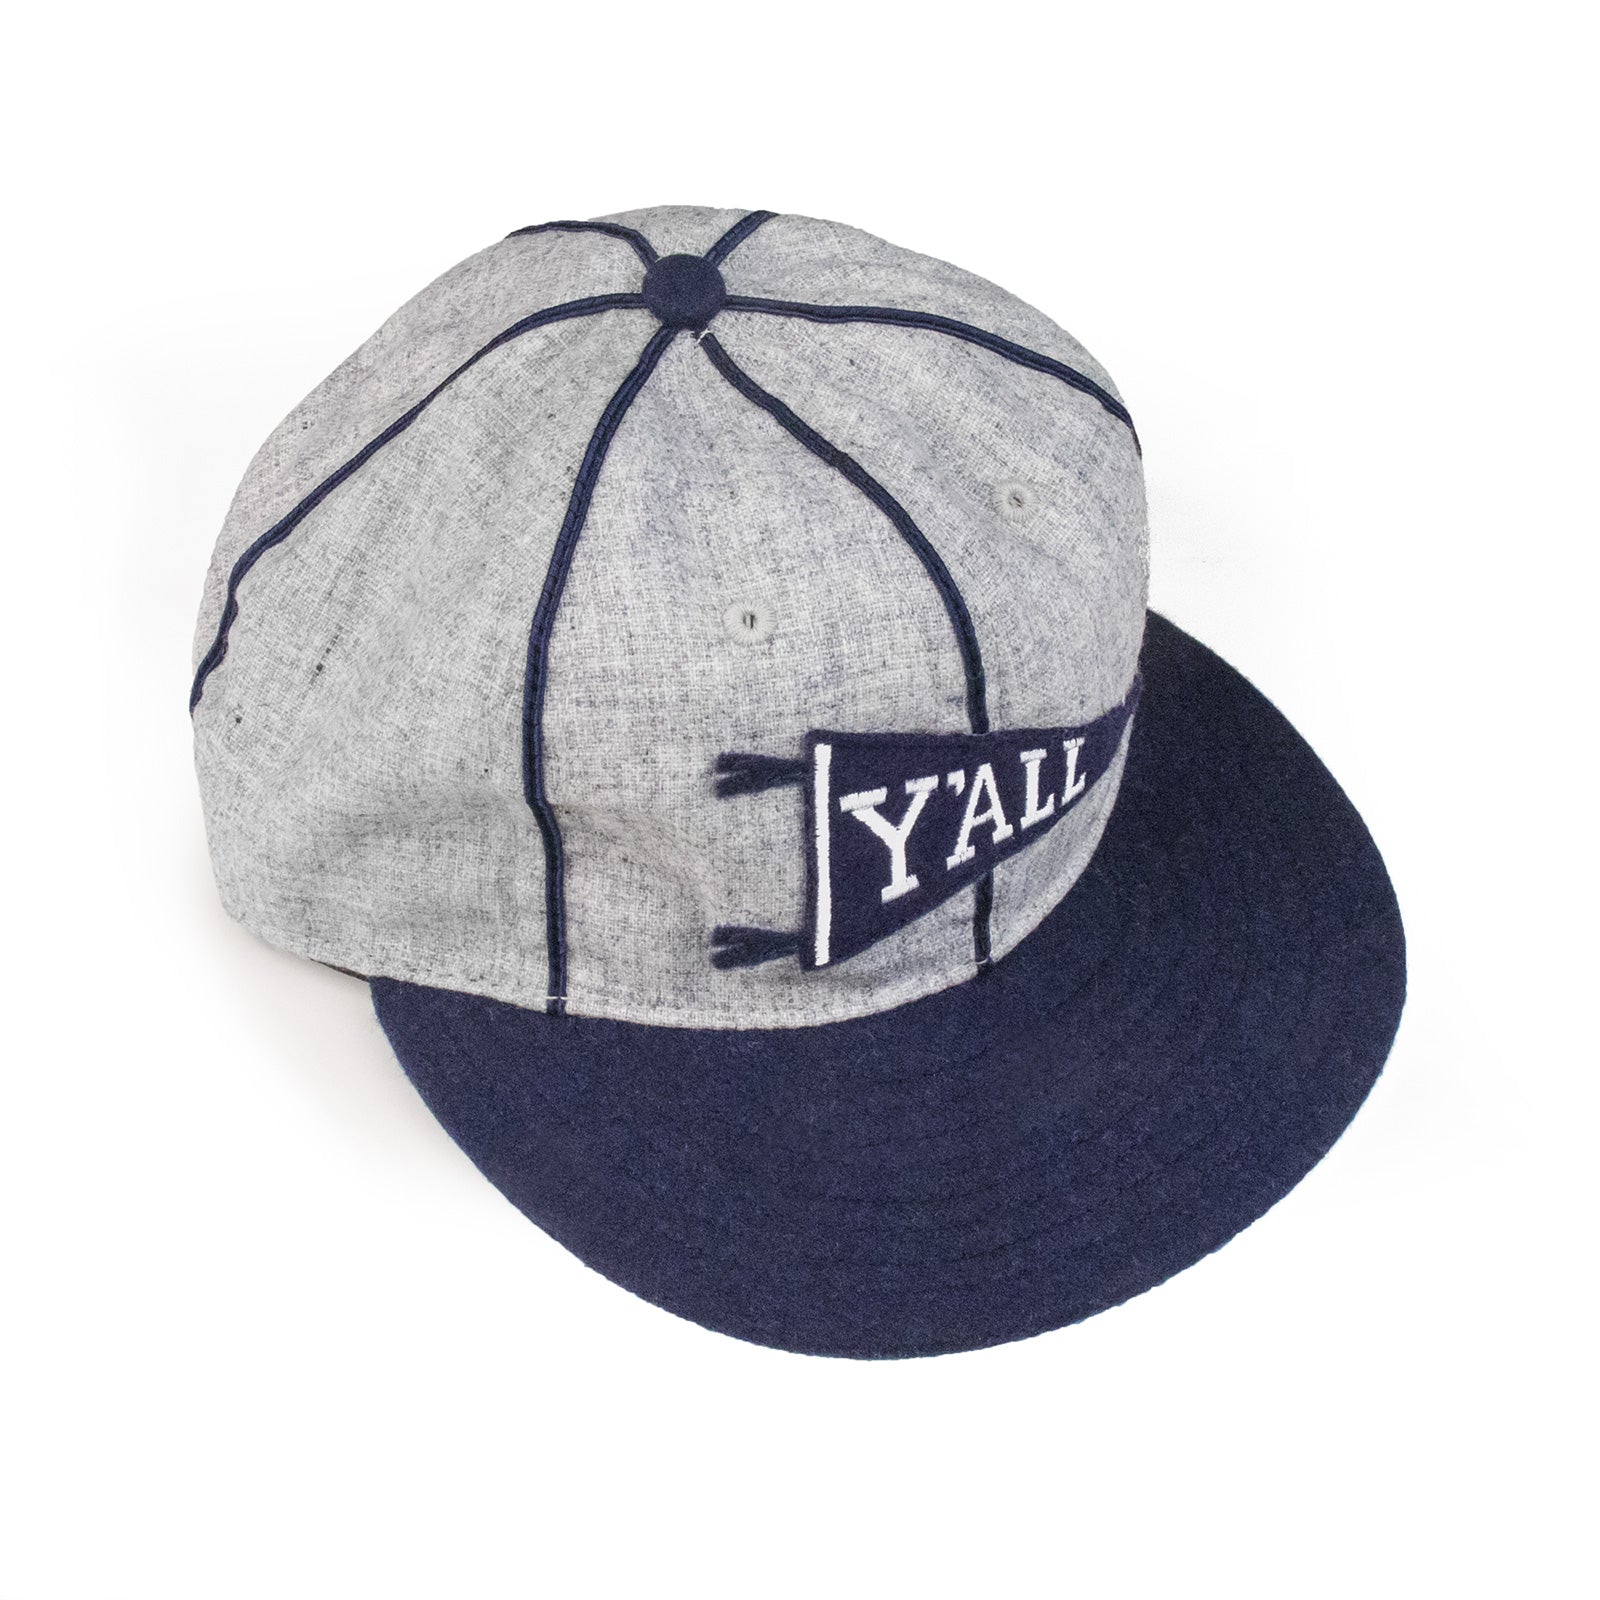 Y'ALL Pennant Ebbets Hat-Hat-KY for KY Store